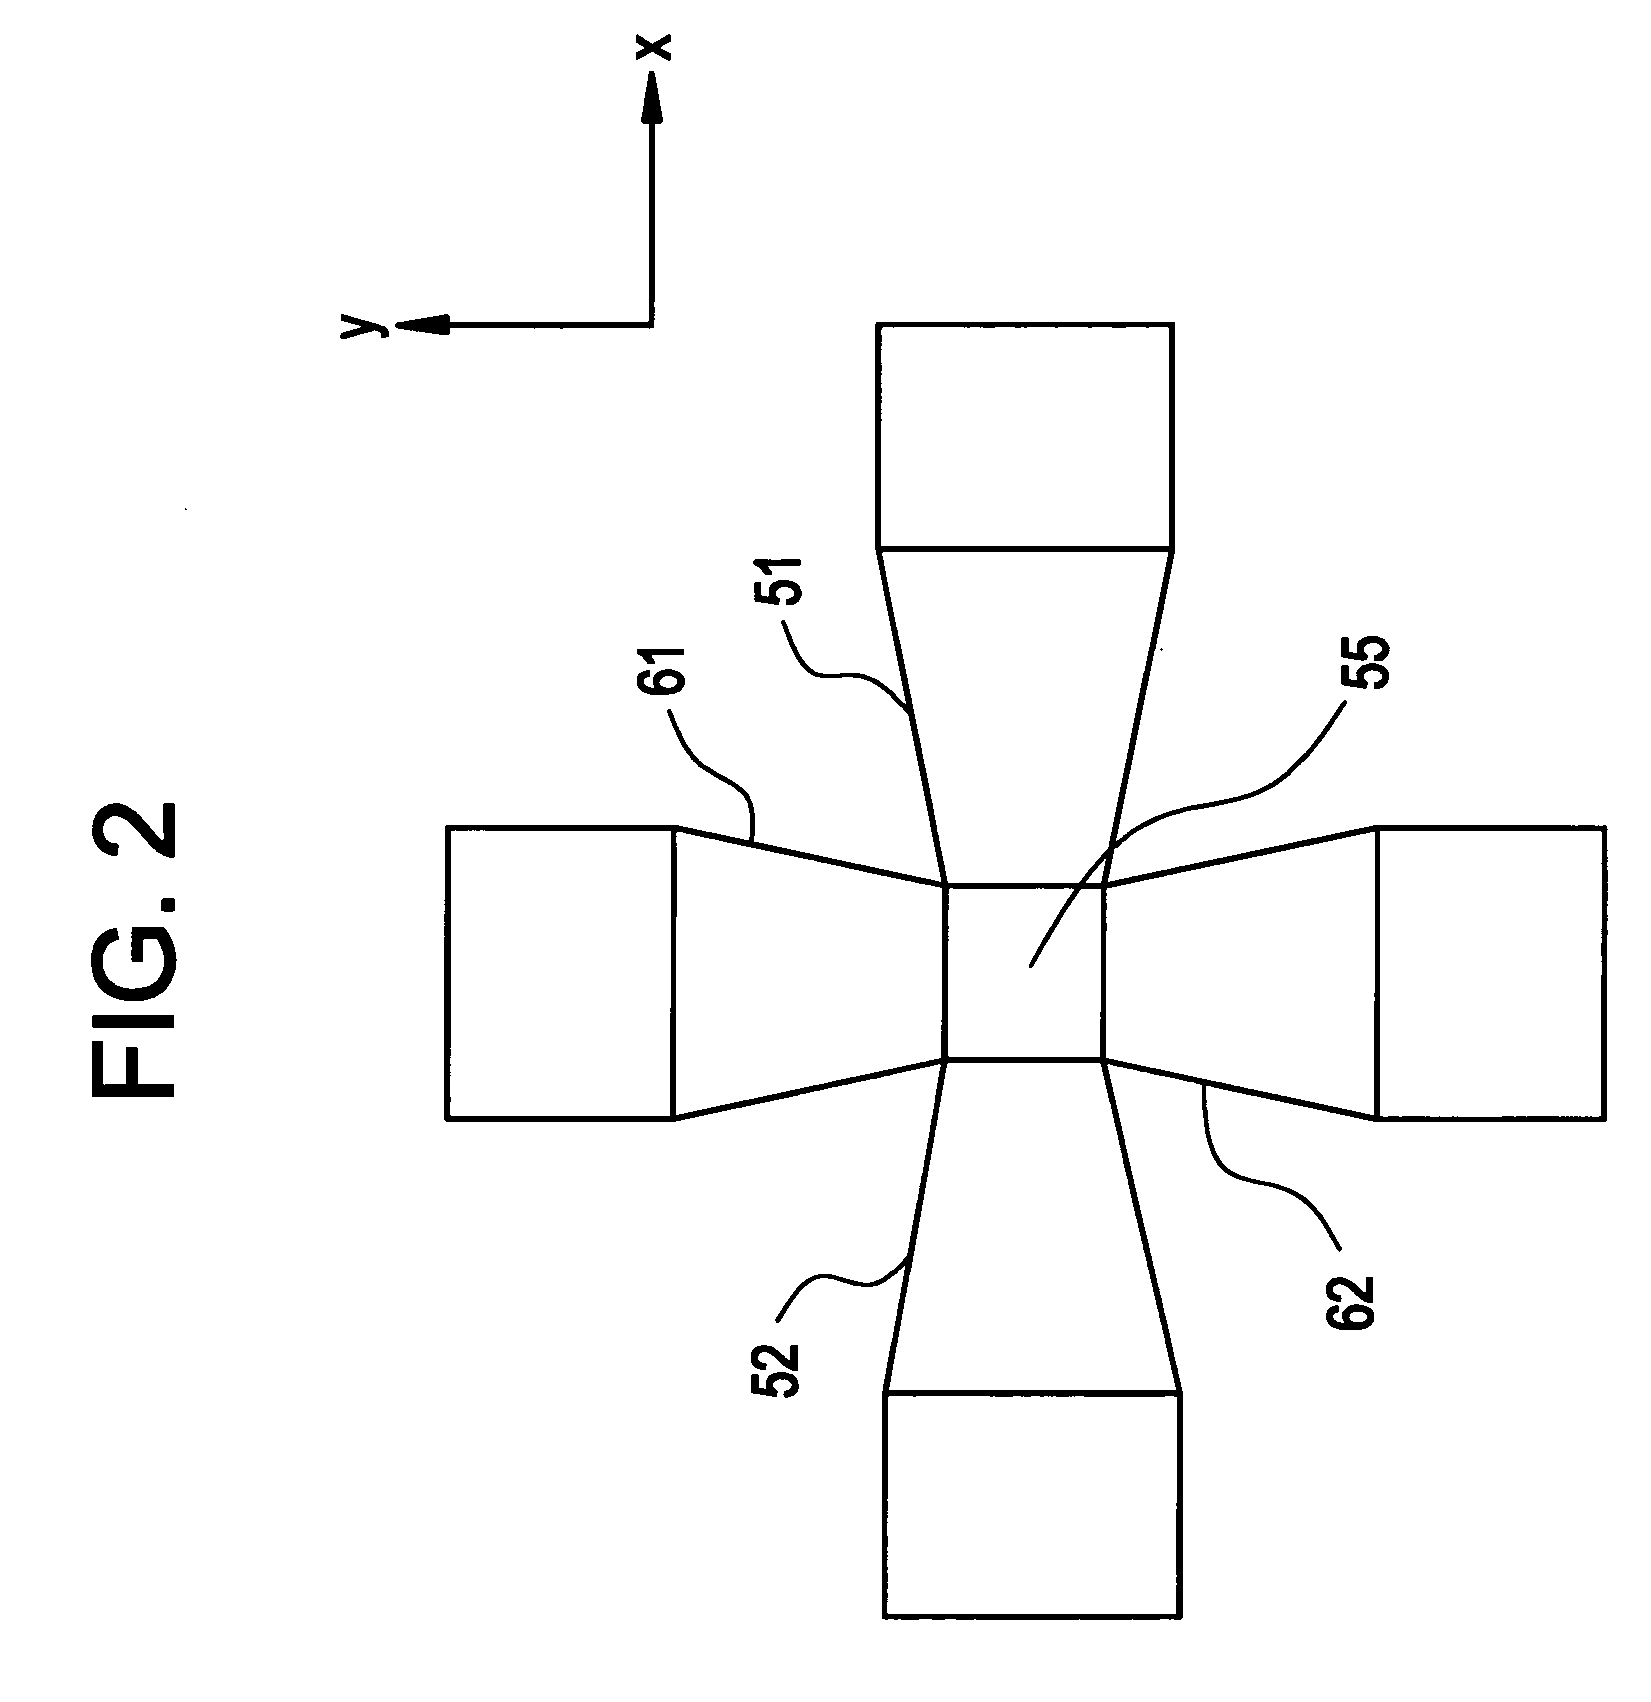 Method and apparatus for reducing force transmitted from a base structure to a supported structure